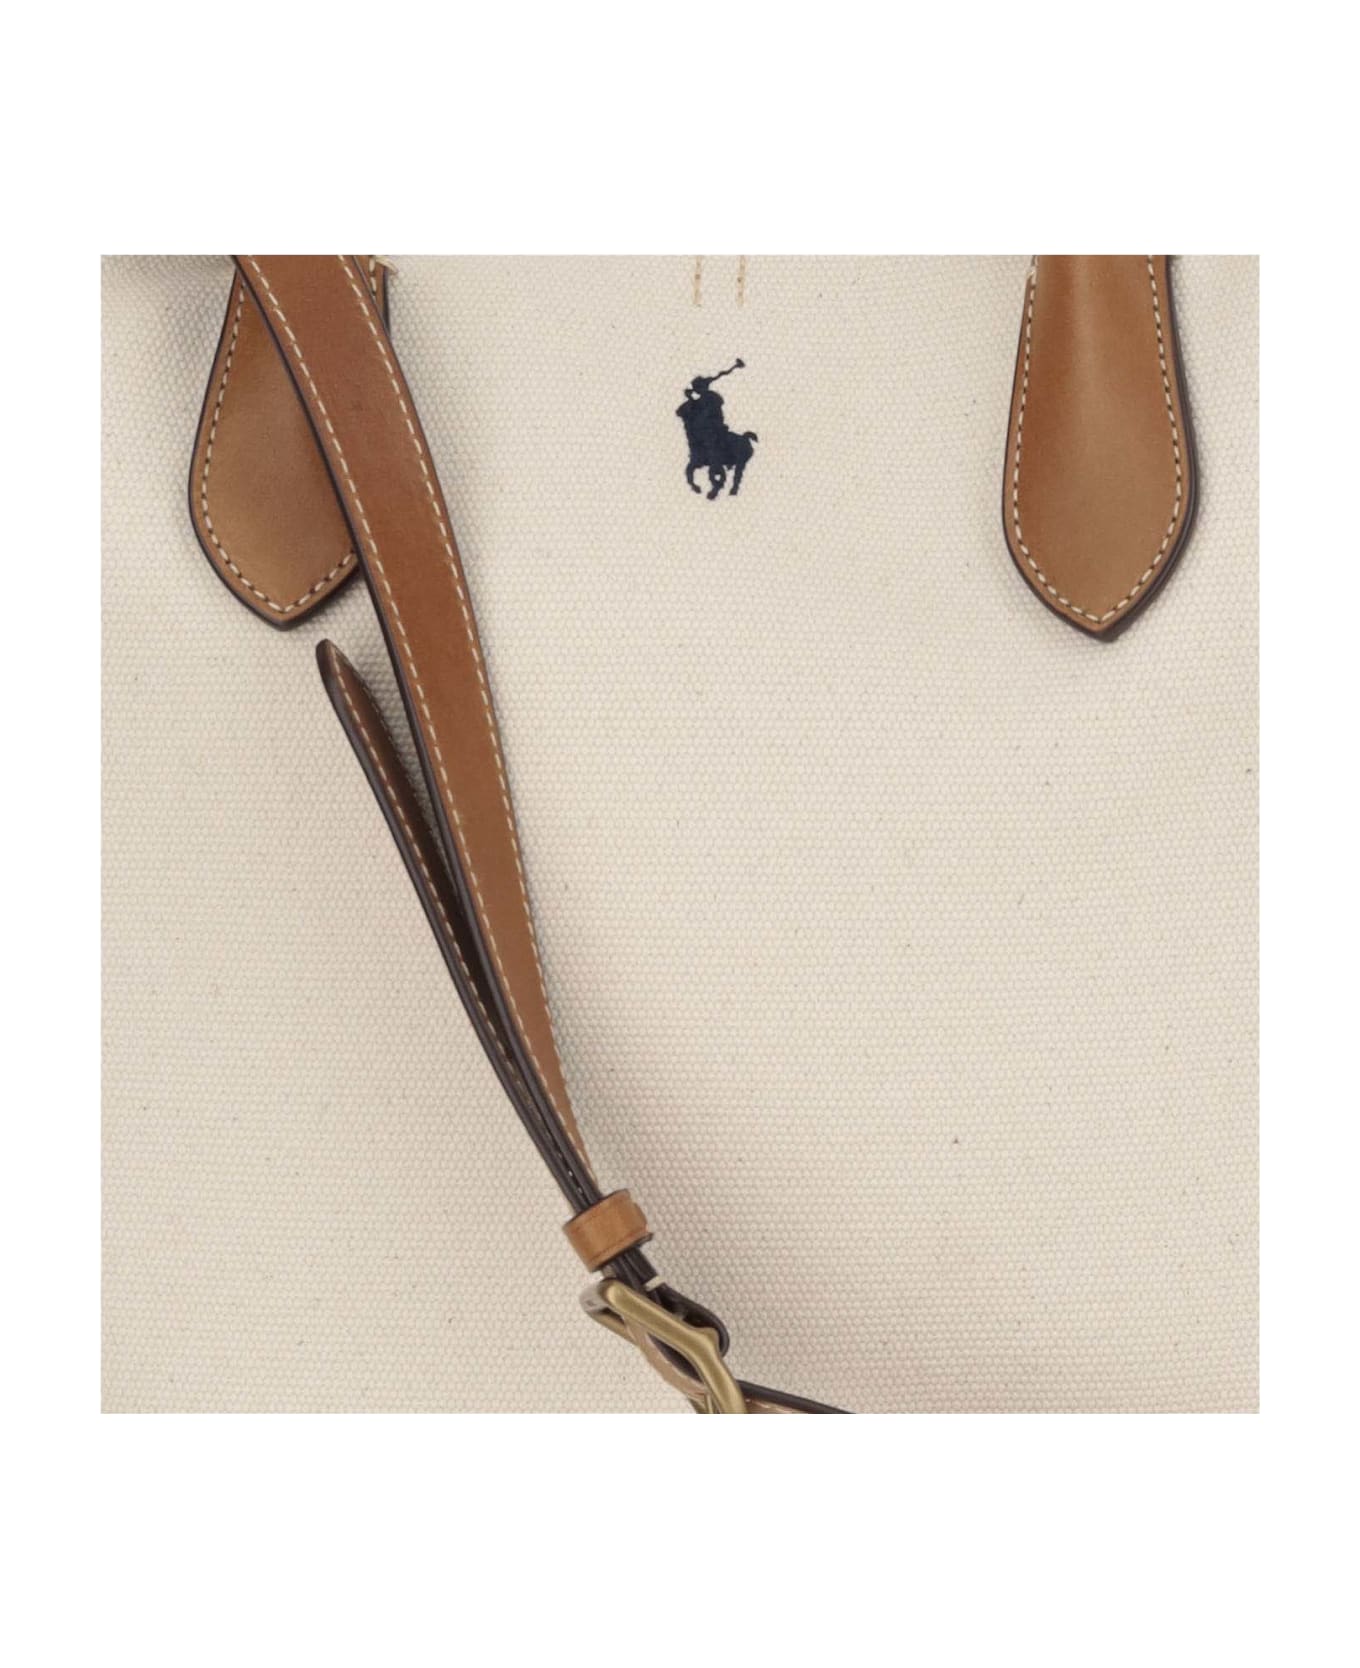 Ralph Lauren Cotton Canvas Tote Bag With Logo - Ivory ショルダーバッグ